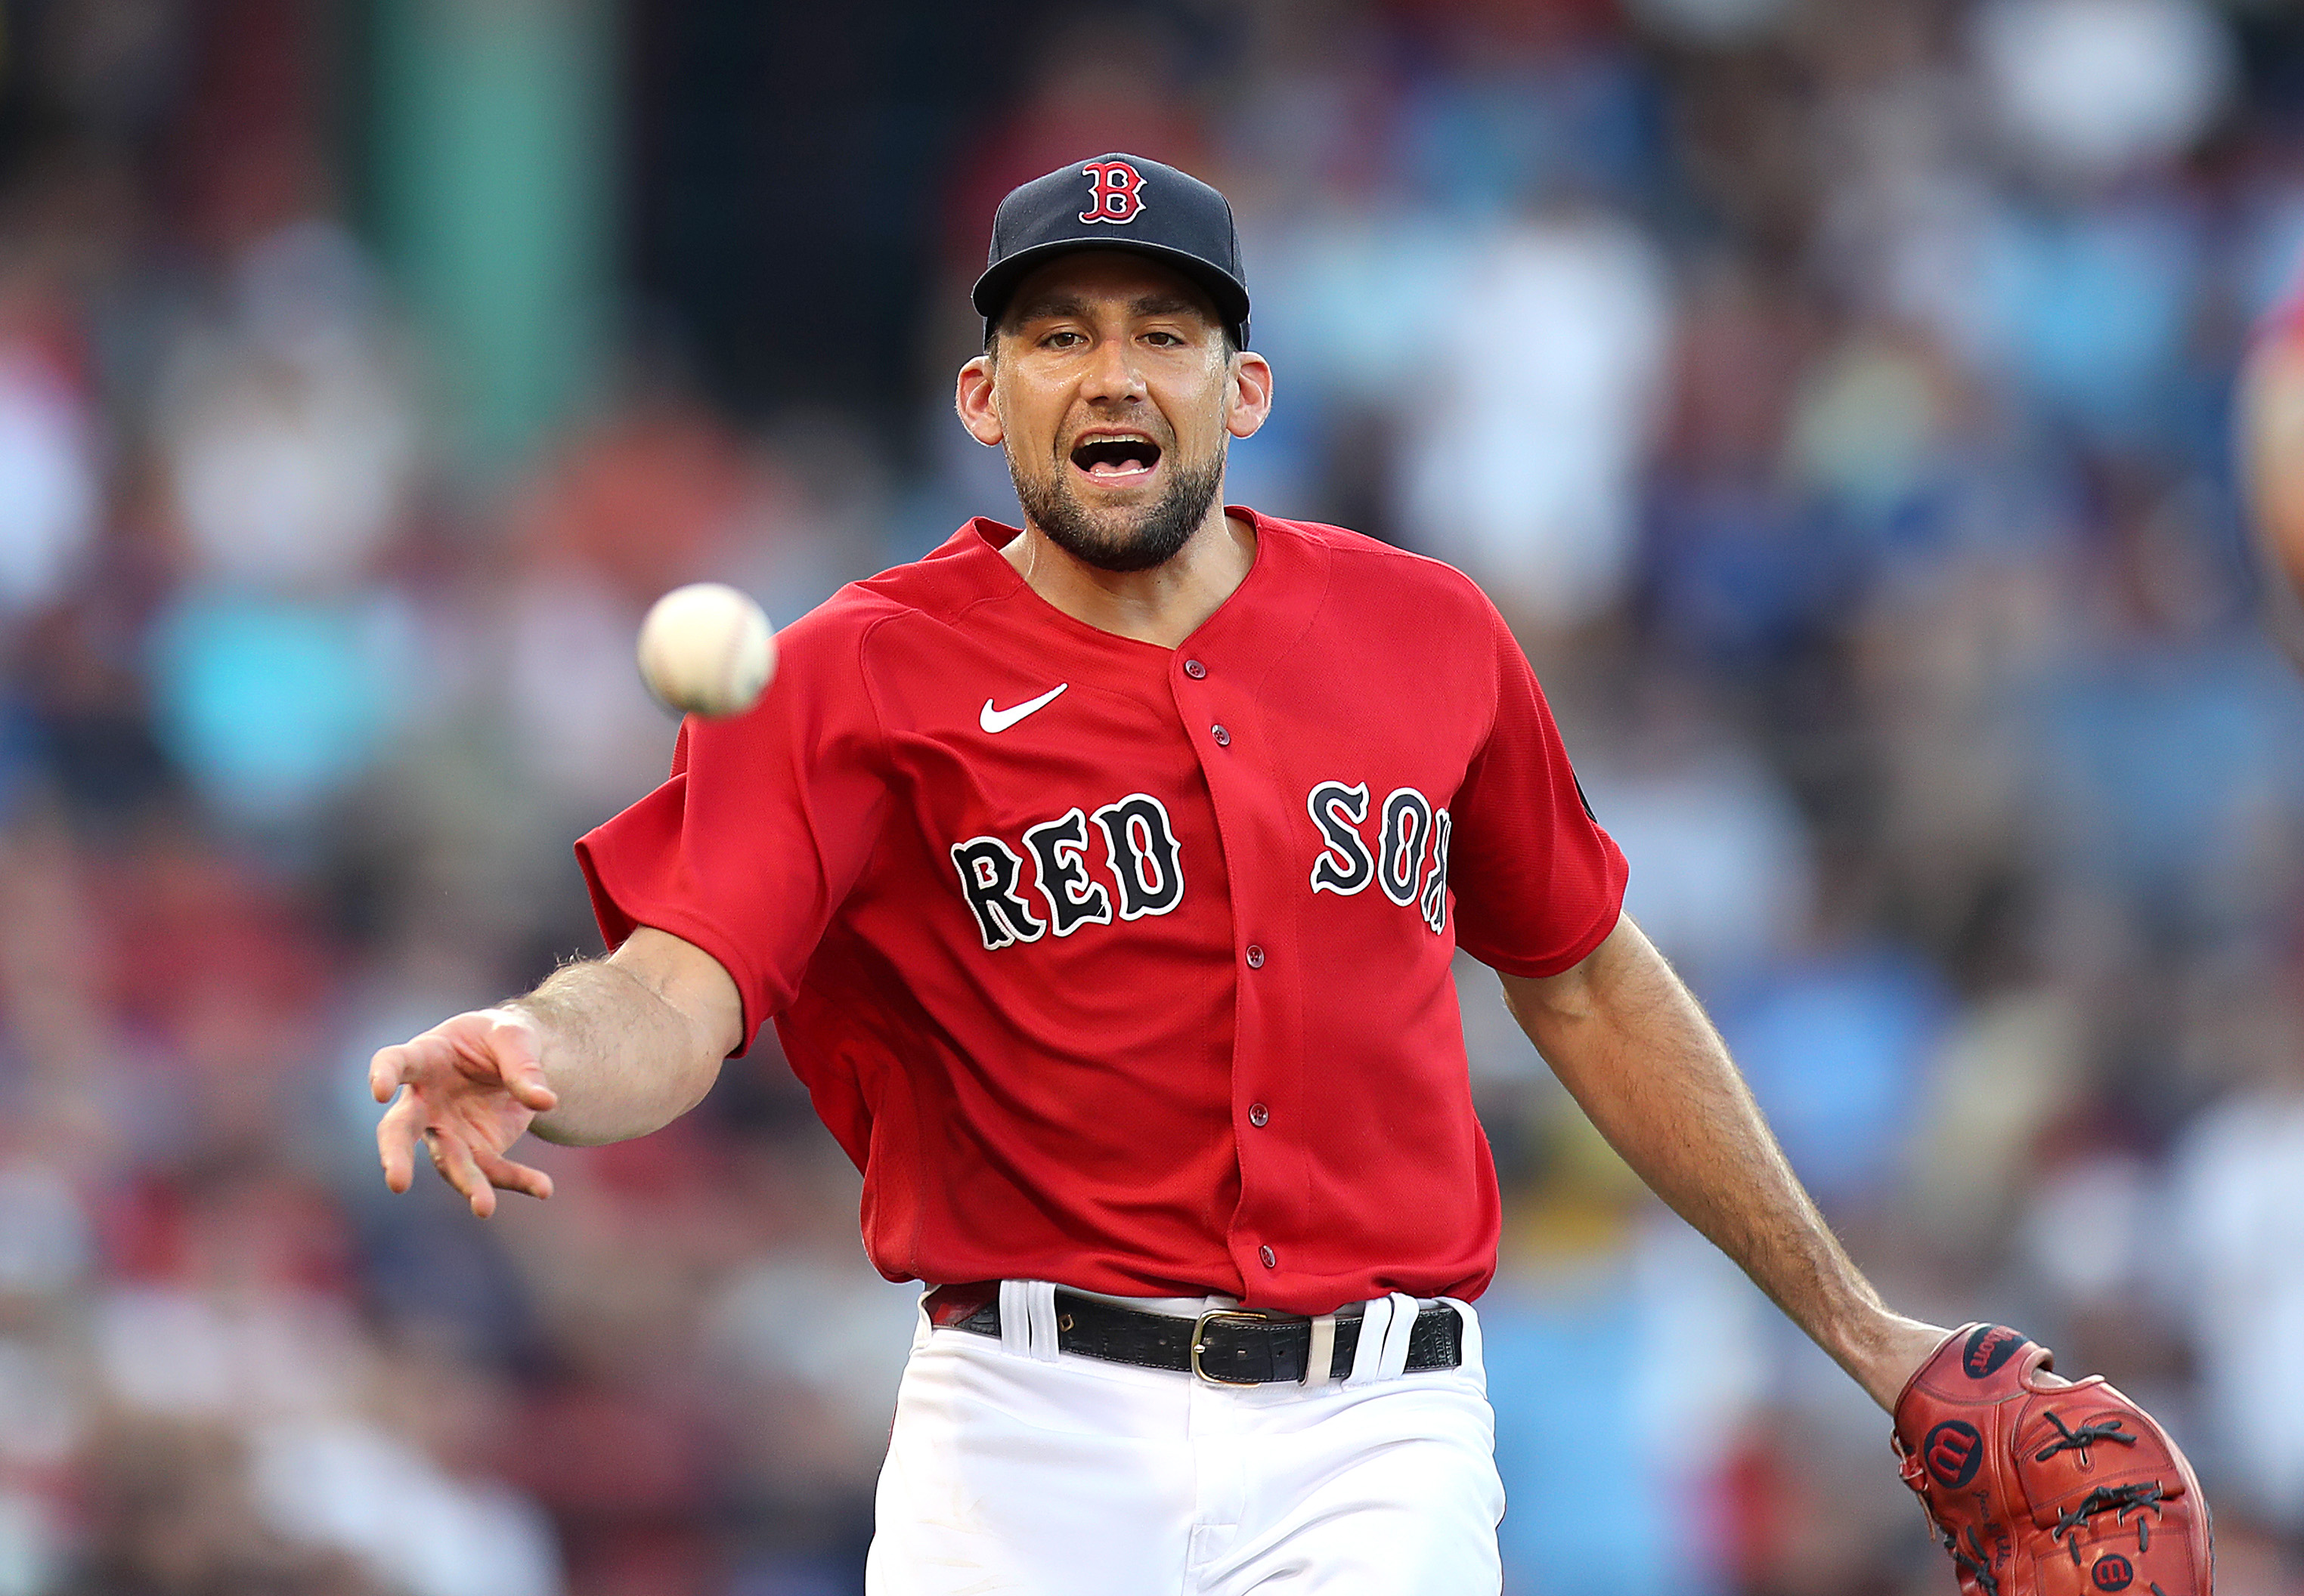 Nate Eovaldi's brilliant performance spoiled as Boston Red Sox bullpen  blows lead in 2-1, extra-inning loss to Orioles 